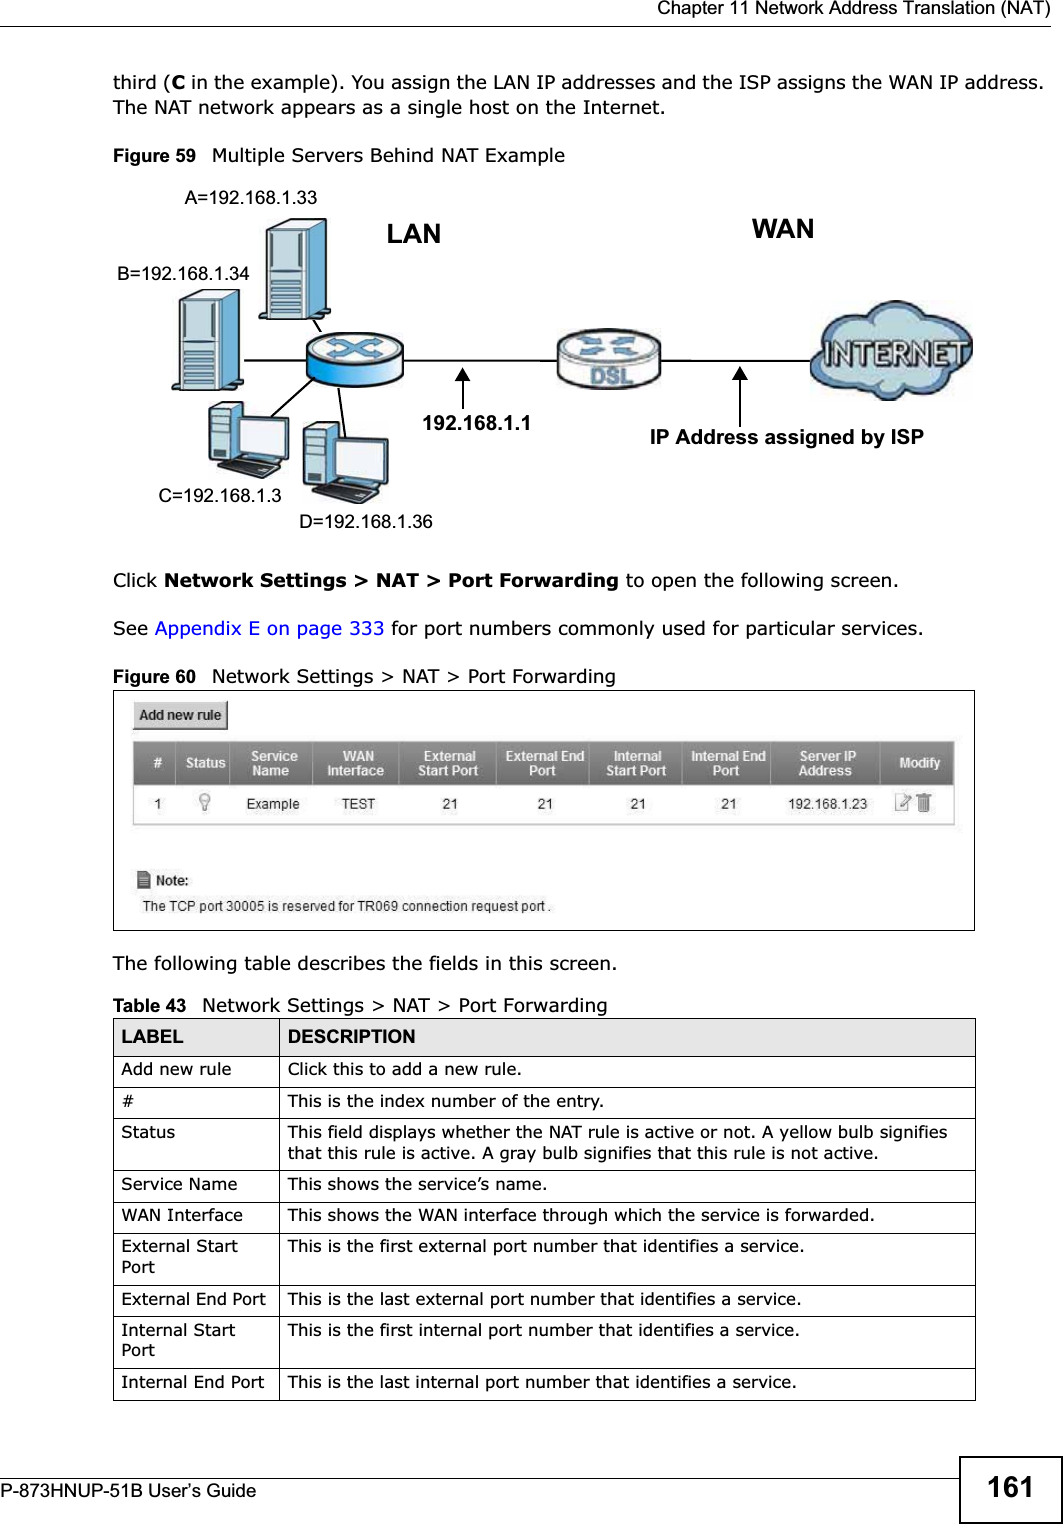  Chapter 11 Network Address Translation (NAT)P-873HNUP-51B User’s Guide 161third (C in the example). You assign the LAN IP addresses and the ISP assigns the WAN IP address. The NAT network appears as a single host on the Internet.Figure 59   Multiple Servers Behind NAT ExampleClick Network Settings &gt; NAT &gt; Port Forwarding to open the following screen.See Appendix E on page 333 for port numbers commonly used for particular services. Figure 60   Network Settings &gt; NAT &gt; Port ForwardingThe following table describes the fields in this screen. Table 43   Network Settings &gt; NAT &gt; Port ForwardingLABEL DESCRIPTIONAdd new rule Click this to add a new rule.#This is the index number of the entry.Status This field displays whether the NAT rule is active or not. A yellow bulb signifies that this rule is active. A gray bulb signifies that this rule is not active.Service Name This shows the service’s name.WAN Interface This shows the WAN interface through which the service is forwarded.External Start Port This is the first external port number that identifies a service.External End Port  This is the last external port number that identifies a service.Internal Start Port This is the first internal port number that identifies a service.Internal End Port  This is the last internal port number that identifies a service.A=192.168.1.33D=192.168.1.36C=192.168.1.3B=192.168.1.34WANLAN192.168.1.1 IP Address assigned by ISP